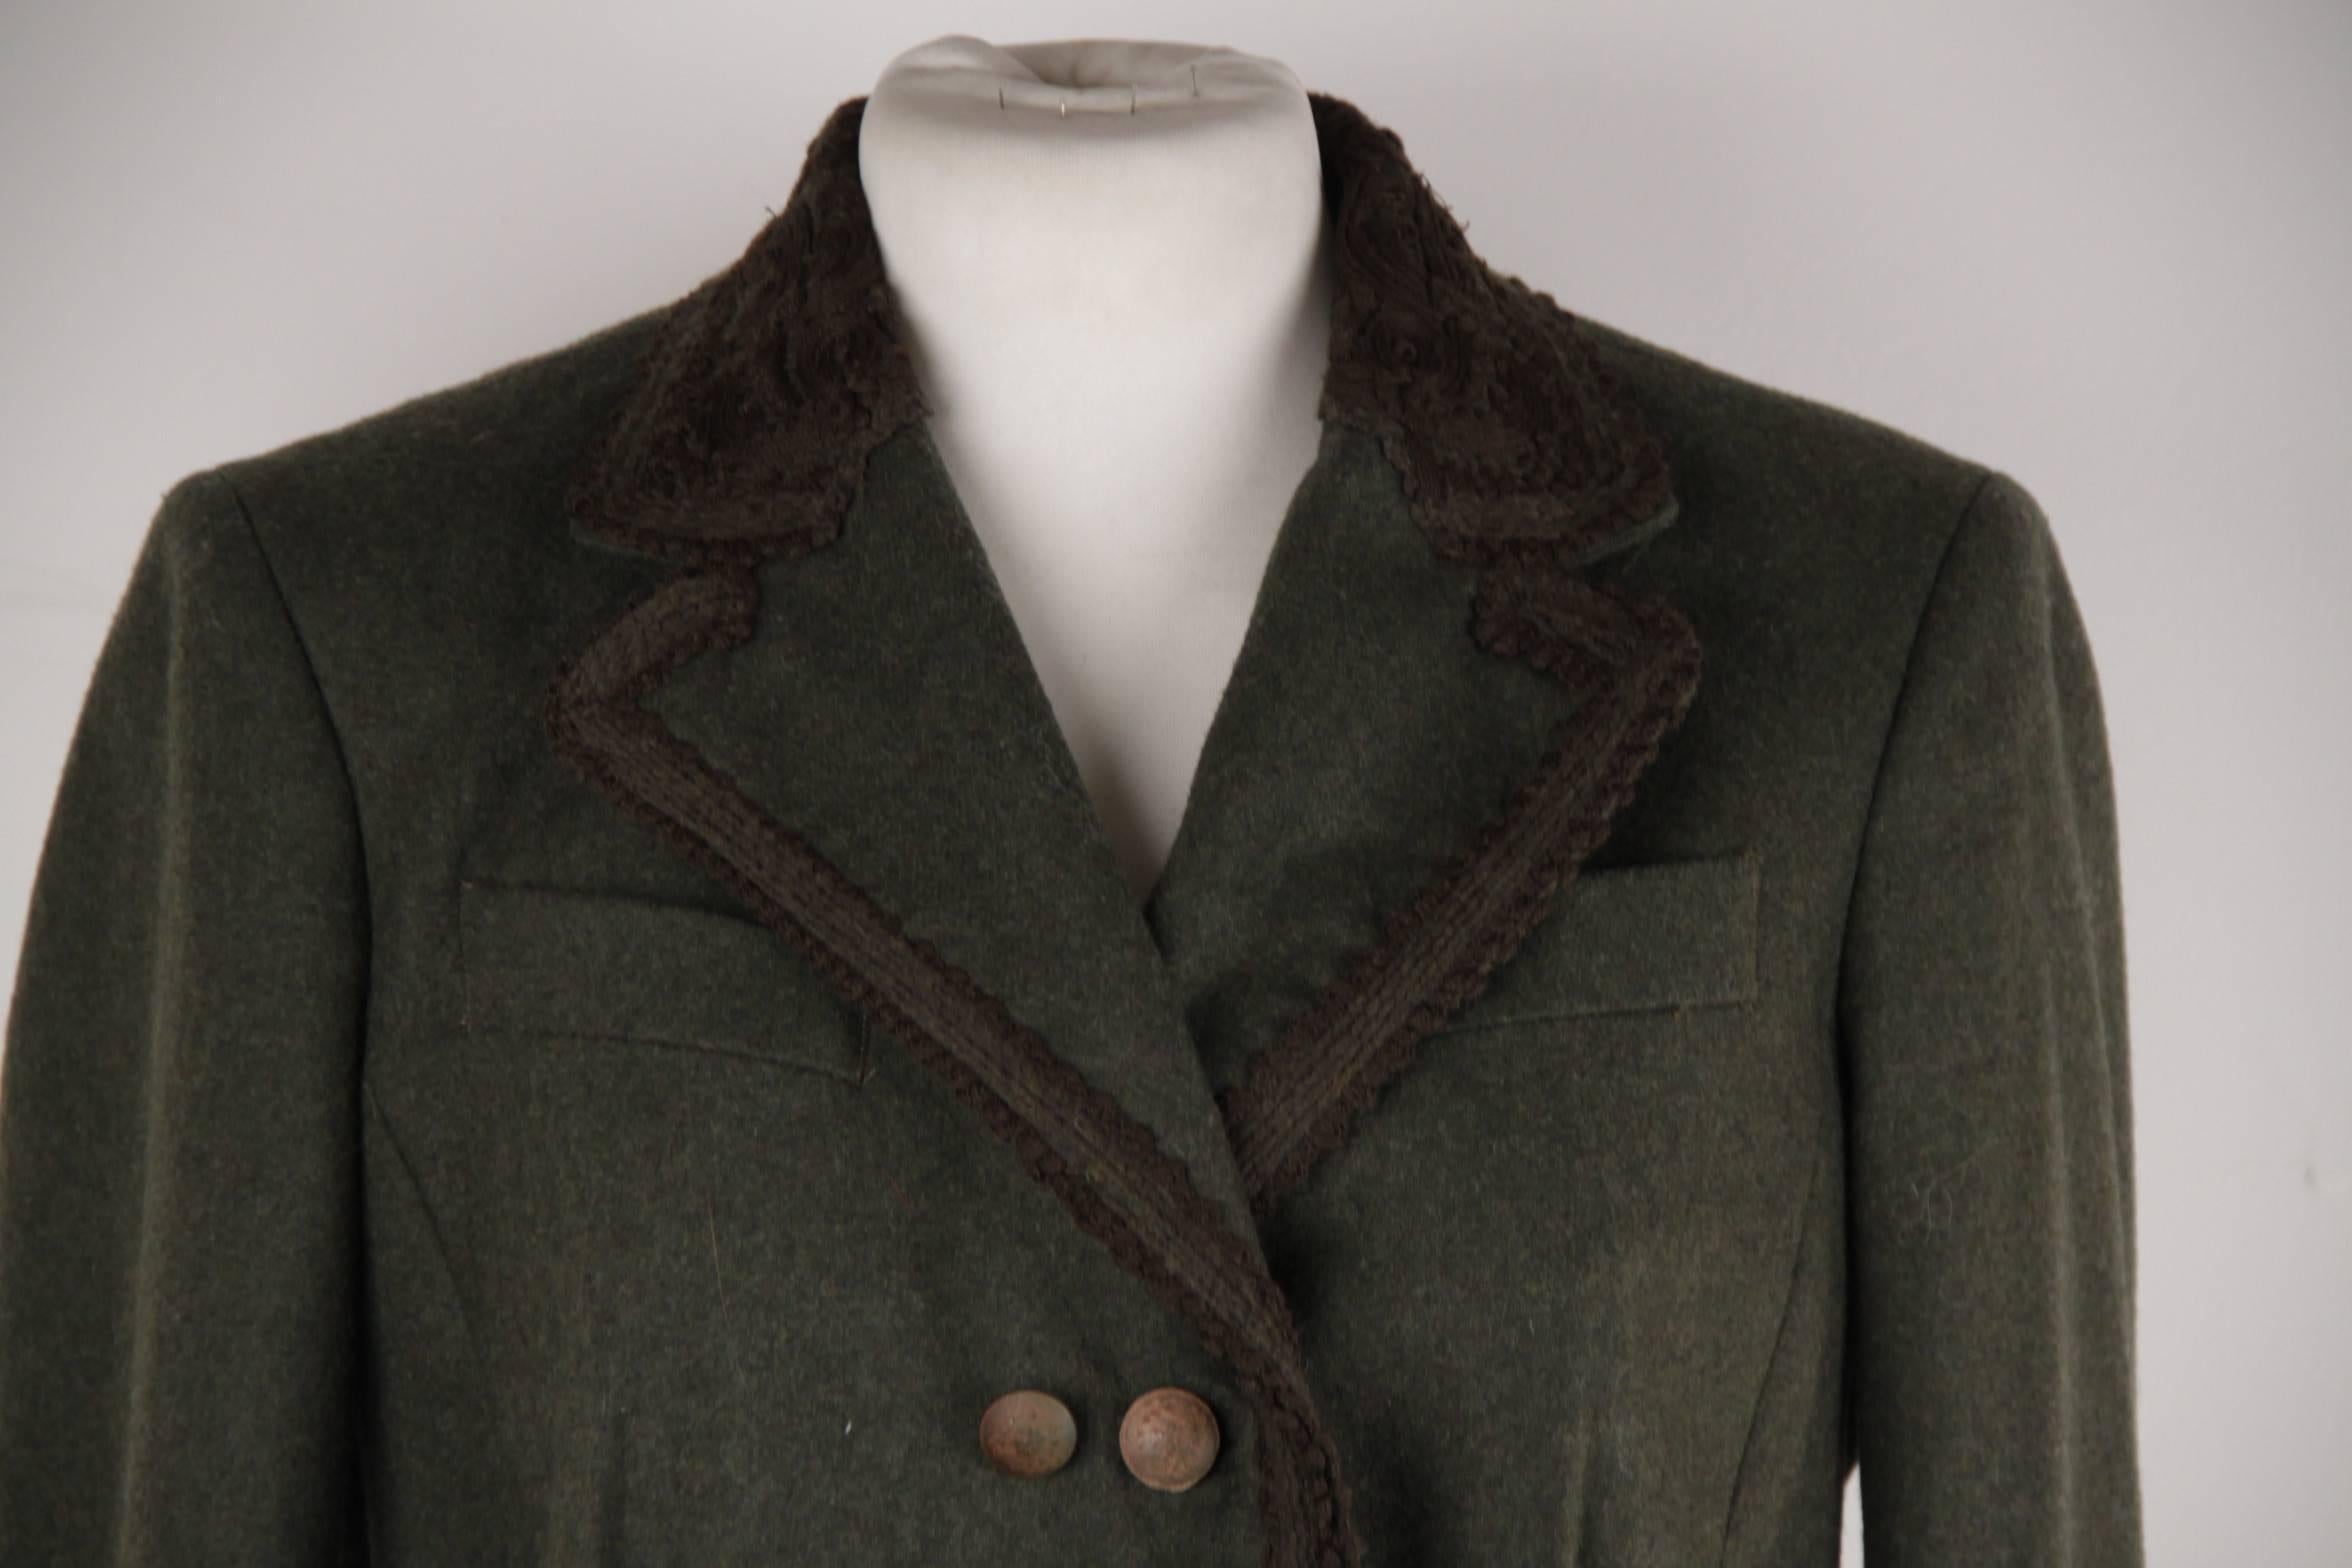 Black ERMANNO SCERVINO Military Green LODEN Wool Jacket w/ Embroidery SZ 44 IT